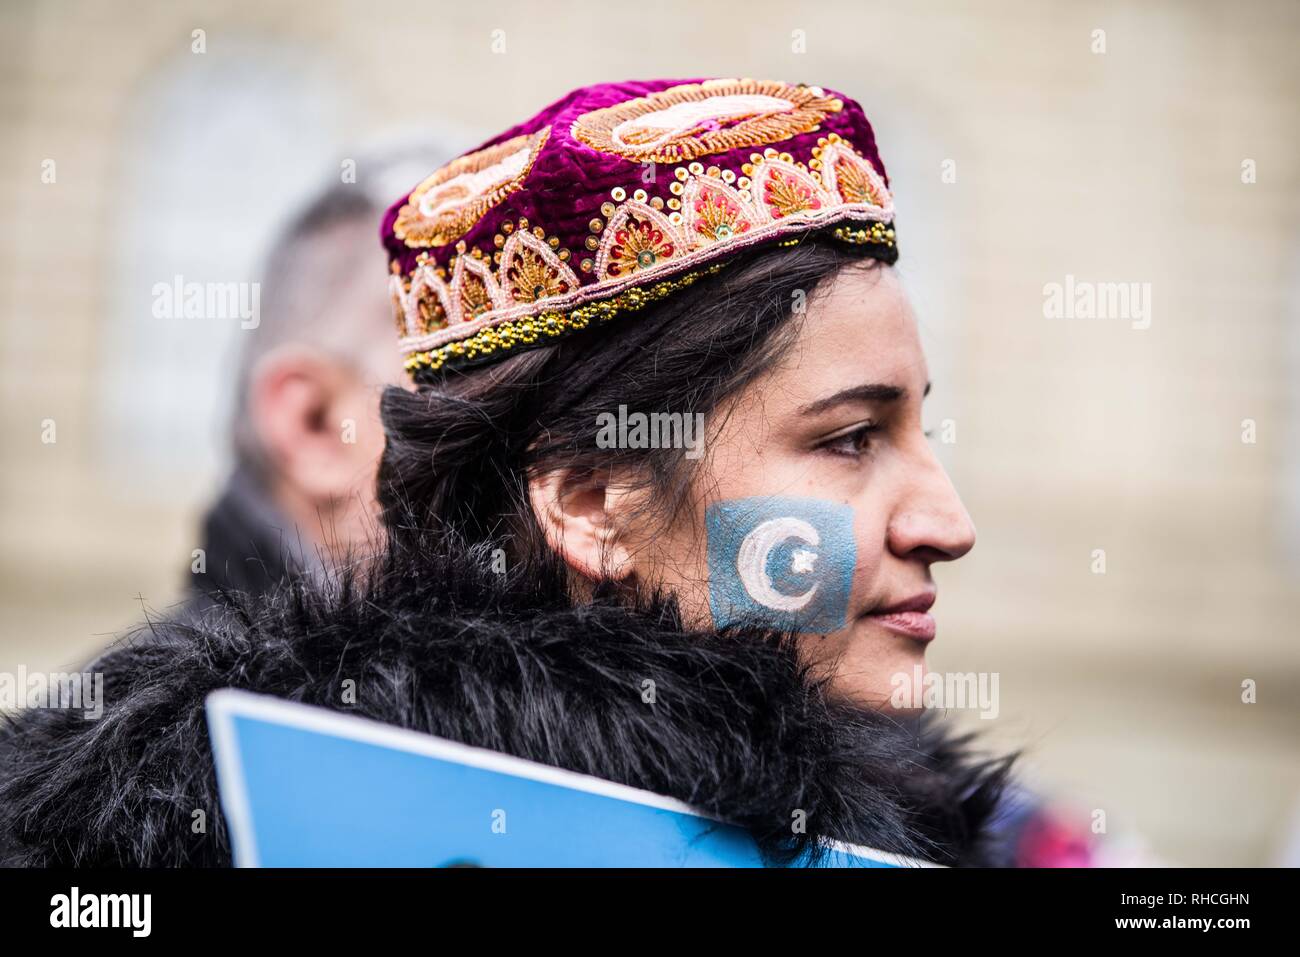 Munich, Bavaria, Germany. 2nd Feb, 2019. A uyghur has the flag of East Turkestan painted on her face. to protest against the so-called 'Muslim Crackdown'' by the Chinese Communist Party in the Xinjiang Autonomous Region of China. The region is contains roughly 26 million people, 11 million of whom are the ethnically Turkic Uyghurs who still call the region East Turkistan . The CCP has placed upwards of 1 million Uyghurs in reeducation camps, as well as performing widespread surveillance of the non-Han r Credit: ZU Credit: ZUMA Press, Inc./Alamy Live News Stock Photo